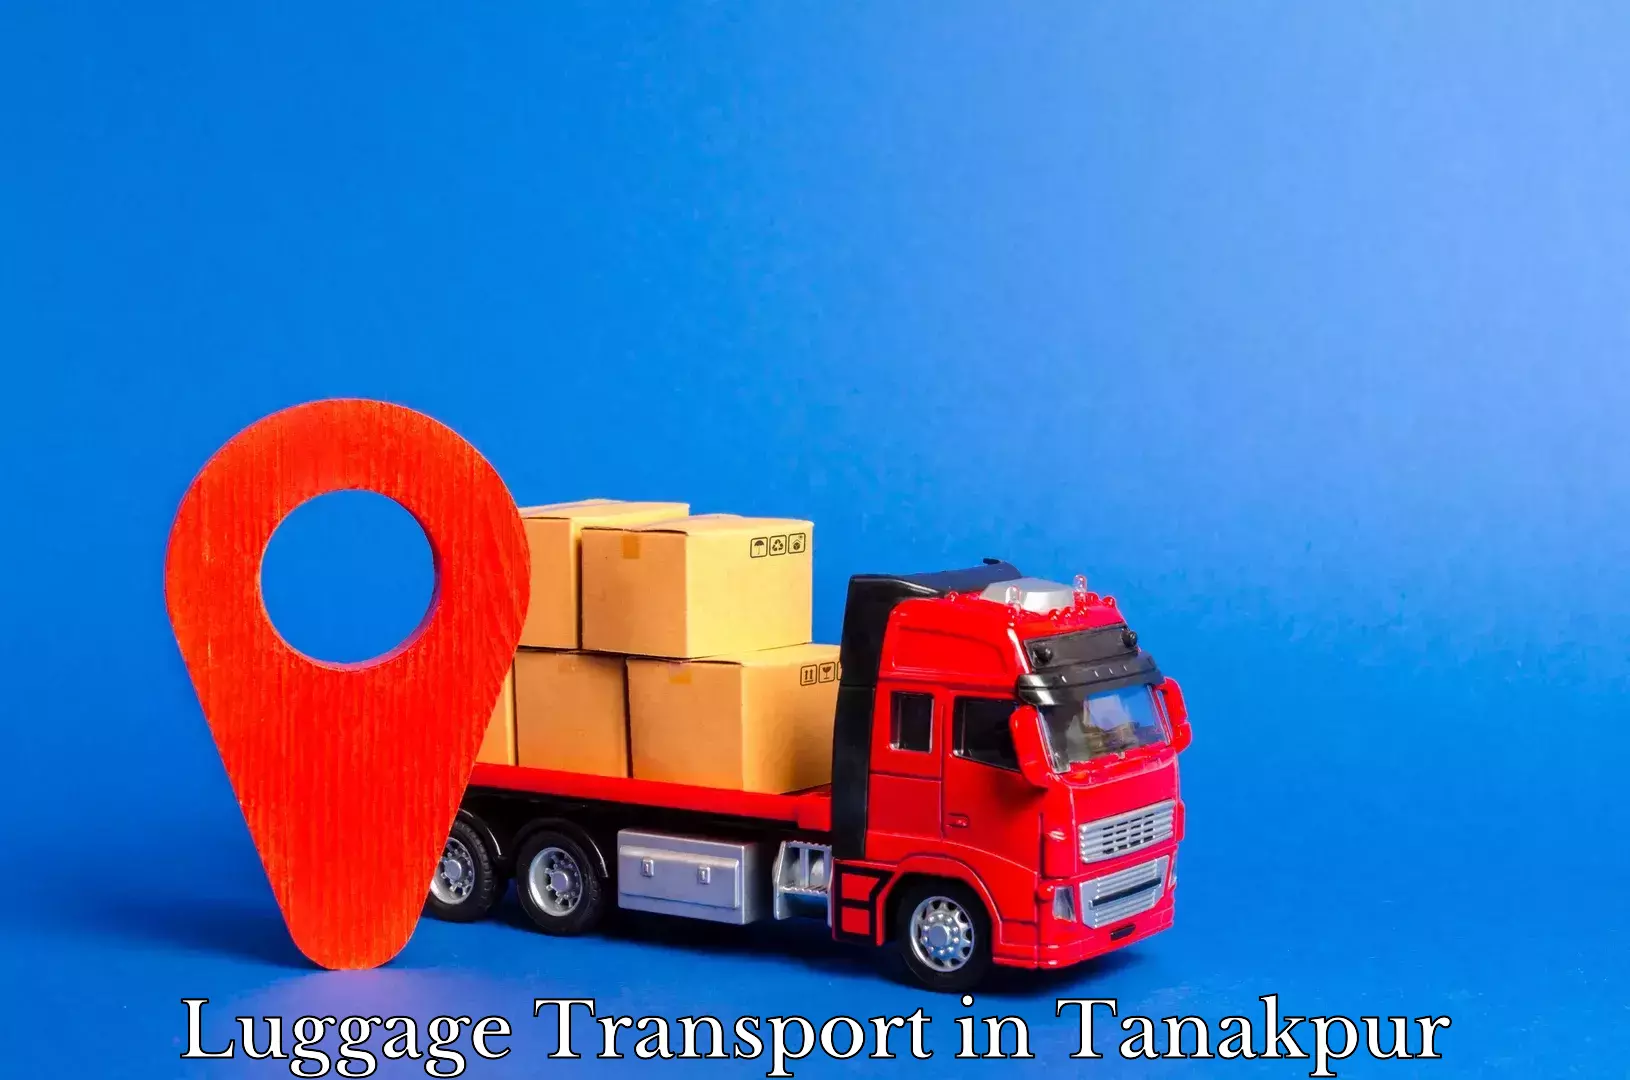 Luggage transport schedule in Tanakpur